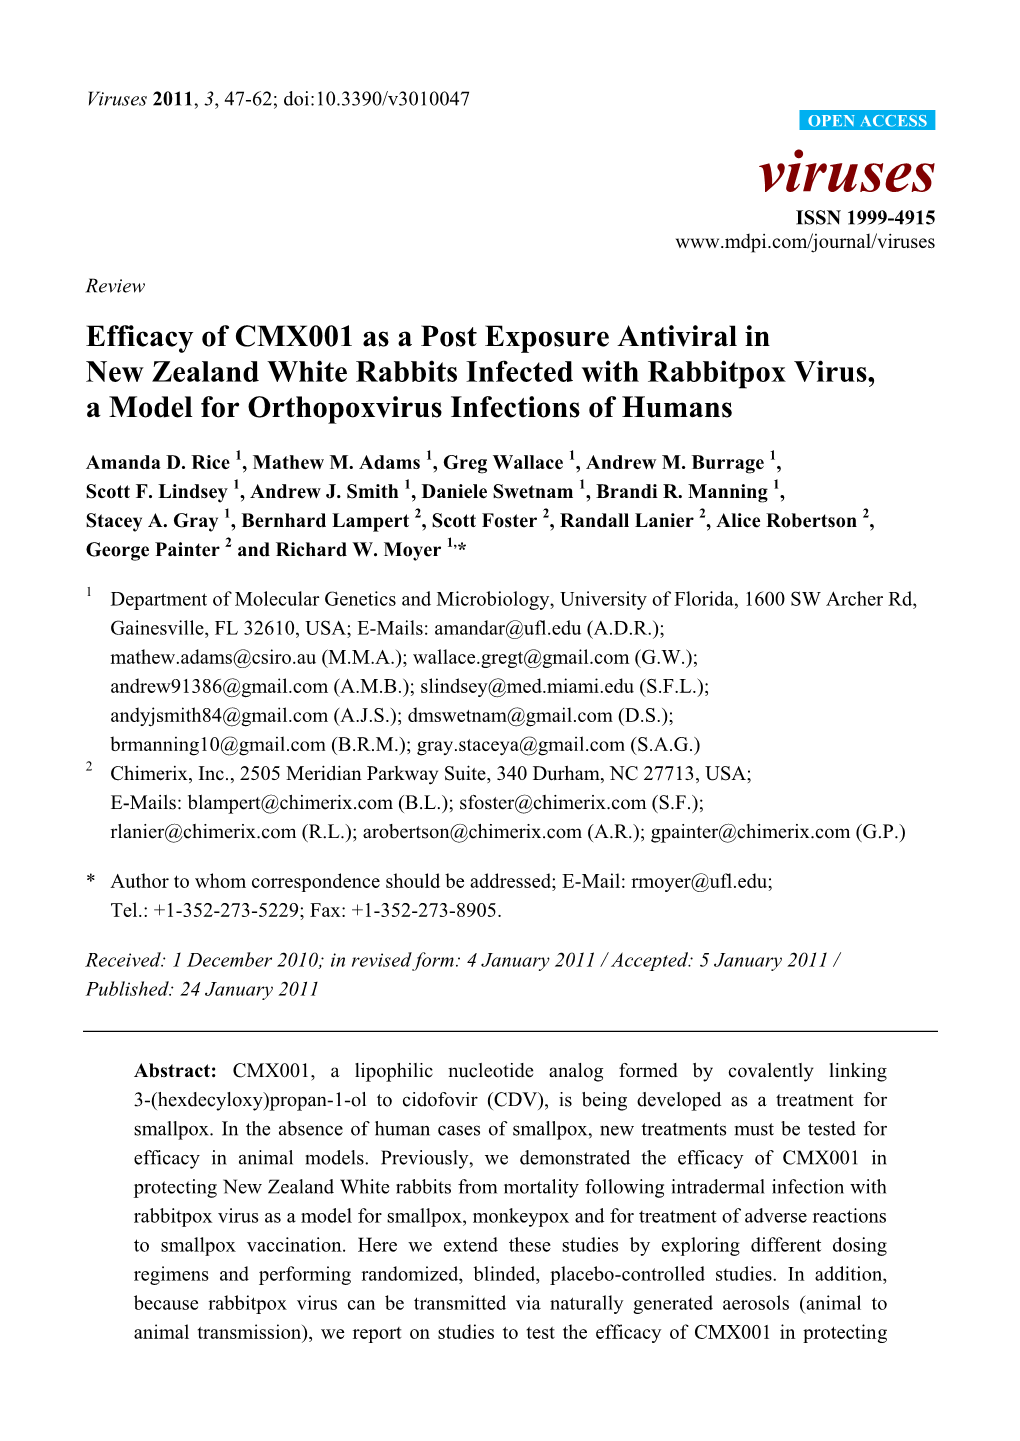 Efficacy of CMX001 As a Post Exposure Antiviral in New Zealand White Rabbits Infected with Rabbitpox Virus, a Model for Orthopoxvirus Infections of Humans